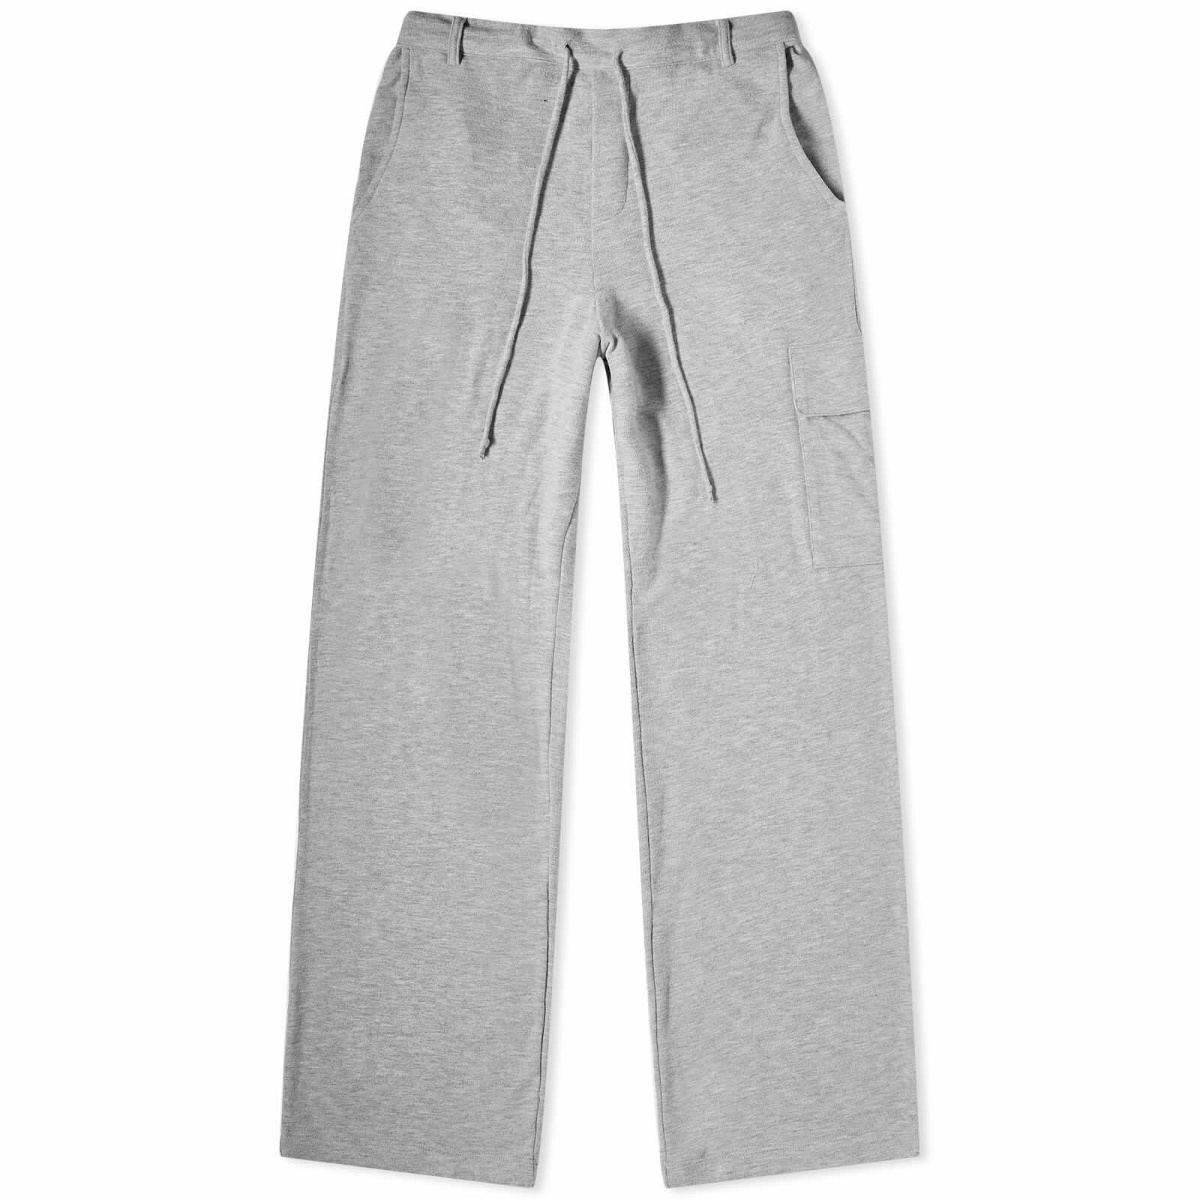 DONNI. Women's Sweater Cargo Pants in Heather Grey DONNI.